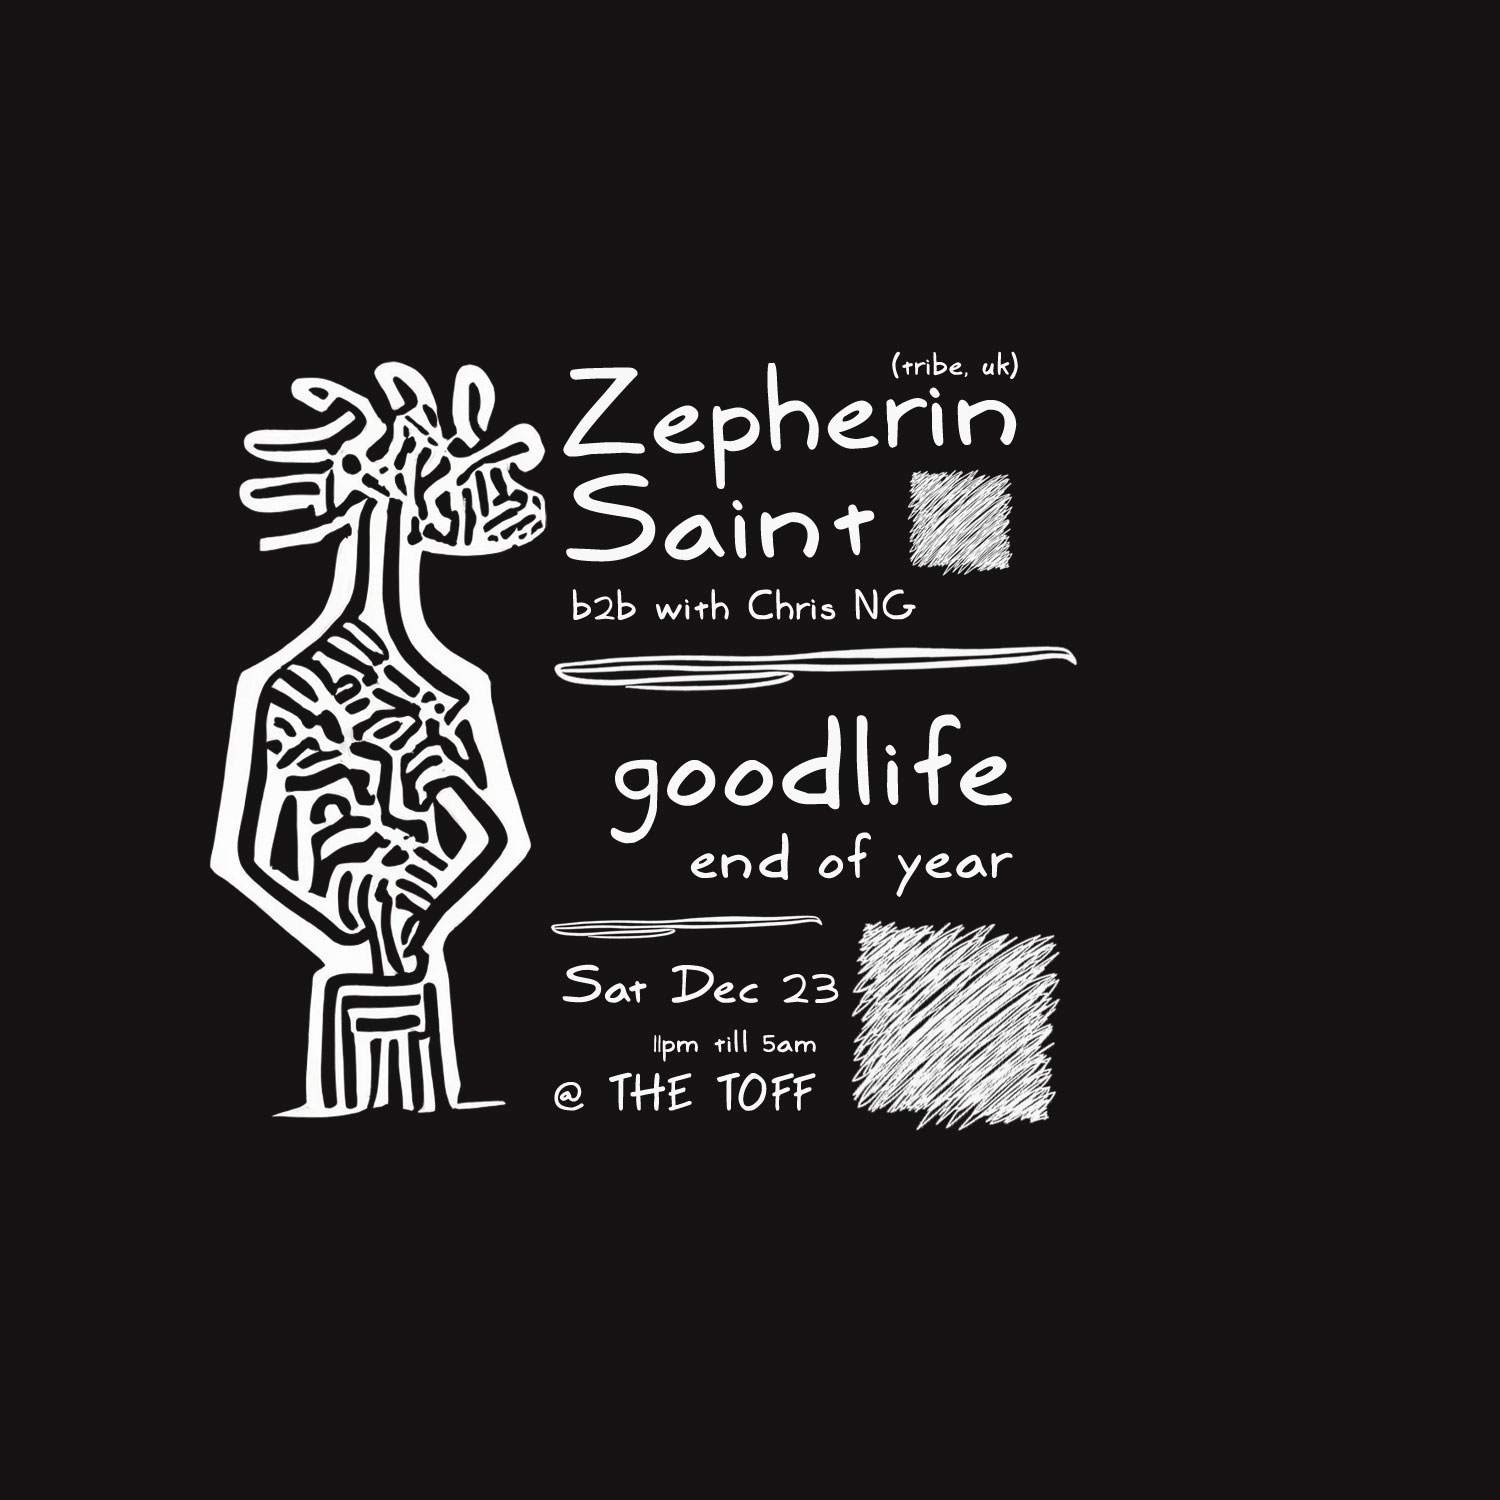 Goodlife End Of Year with Zepherin Saint - フライヤー表